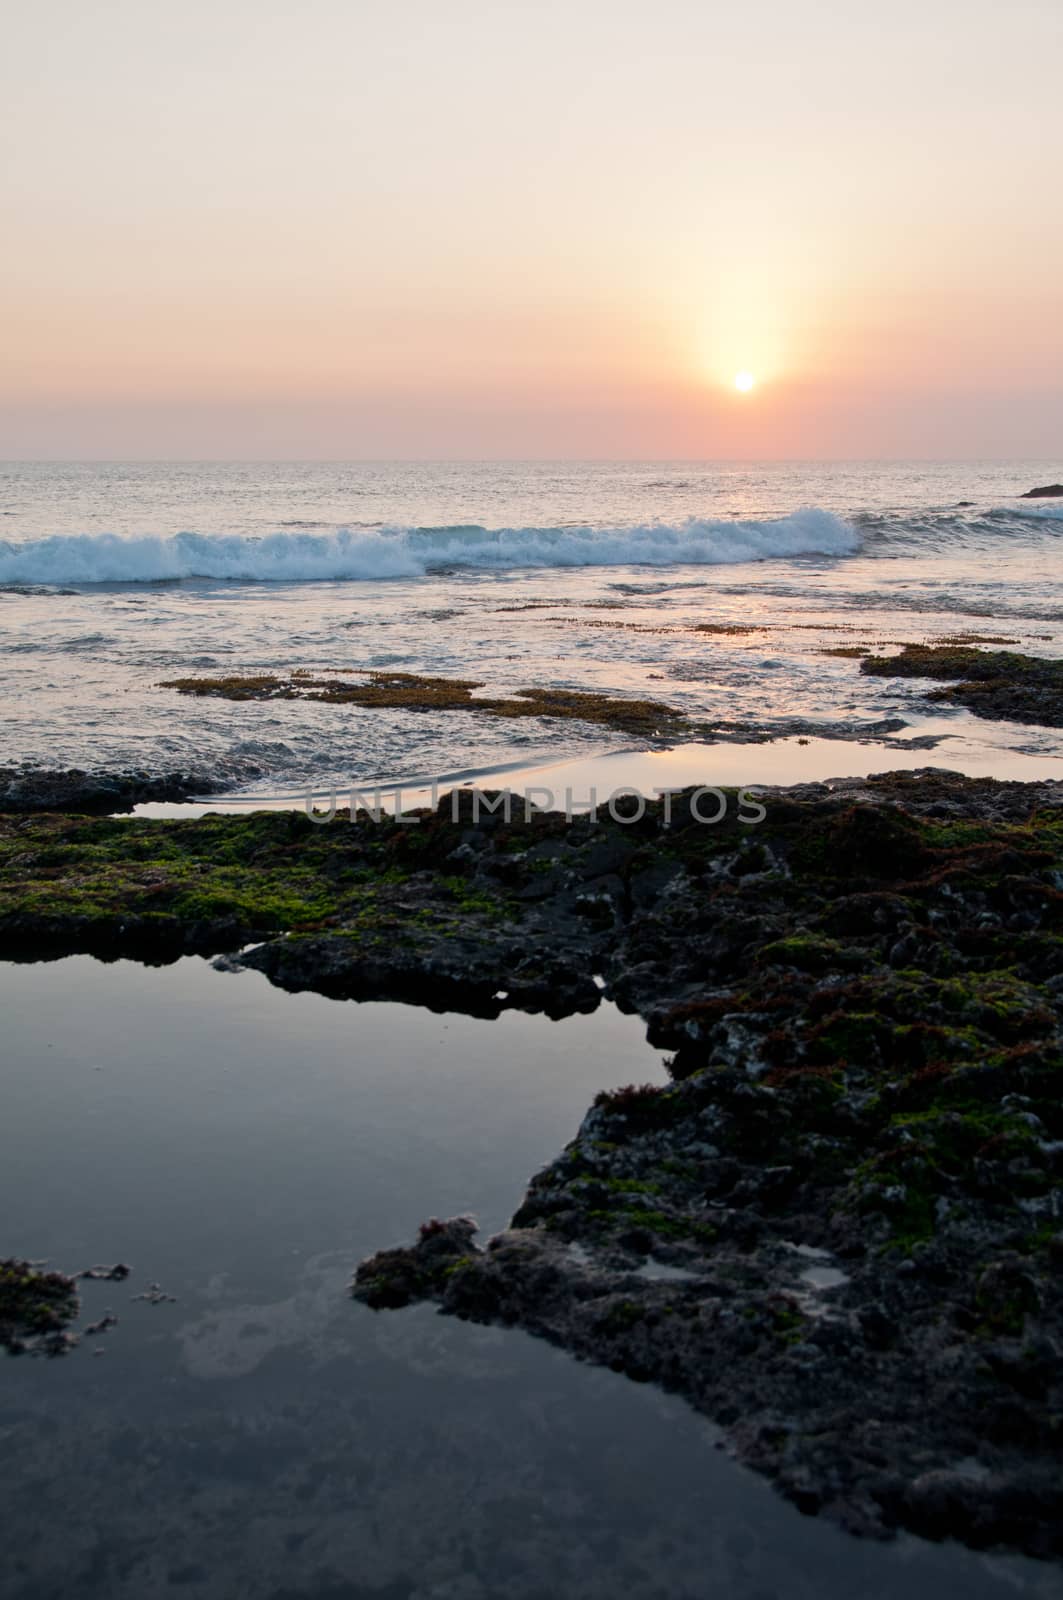 Sunset scene at Tanah Lot beach in Bali Indonesia sea in the evening